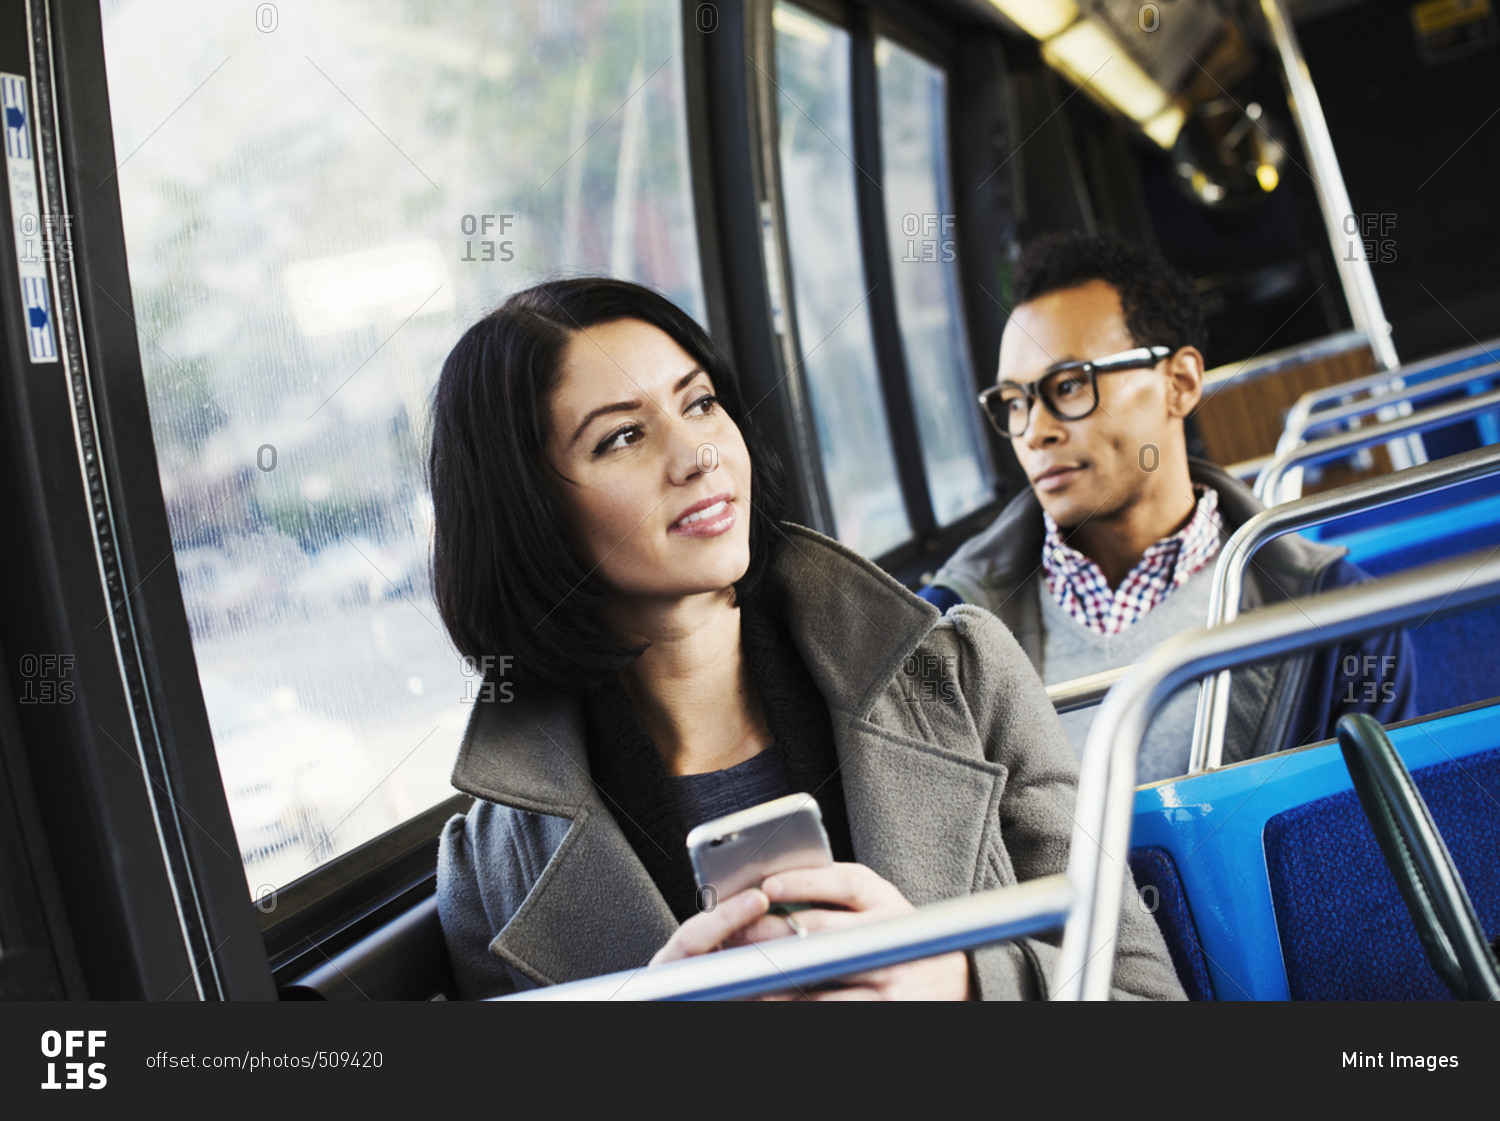 A young man and a young woman sitting on public transport holding their cellphones and looking around